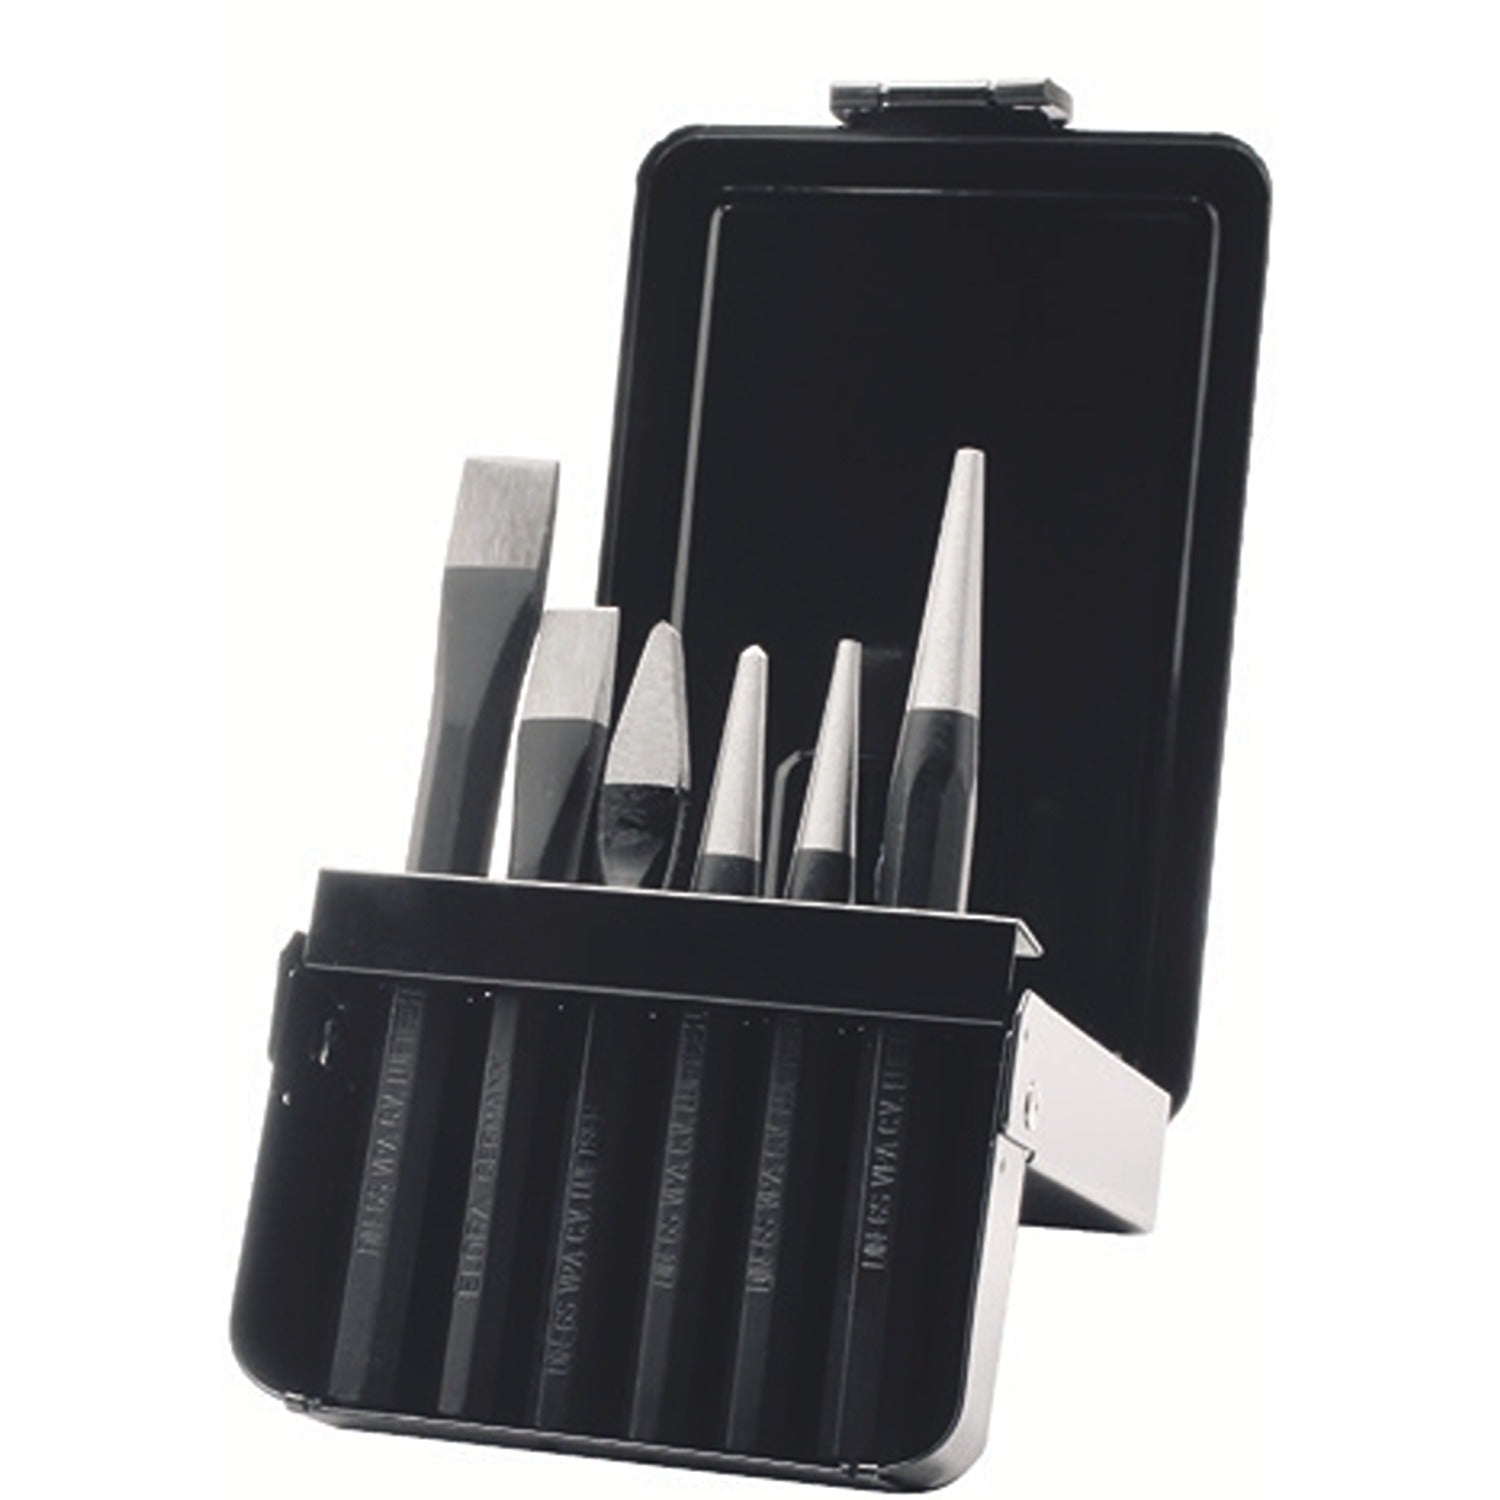 ELORA 266KS Chisel And Punch Set In Plastic Holder (ELORA Tools) - Premium Chisel and Punch Set from ELORA - Shop now at Yew Aik.